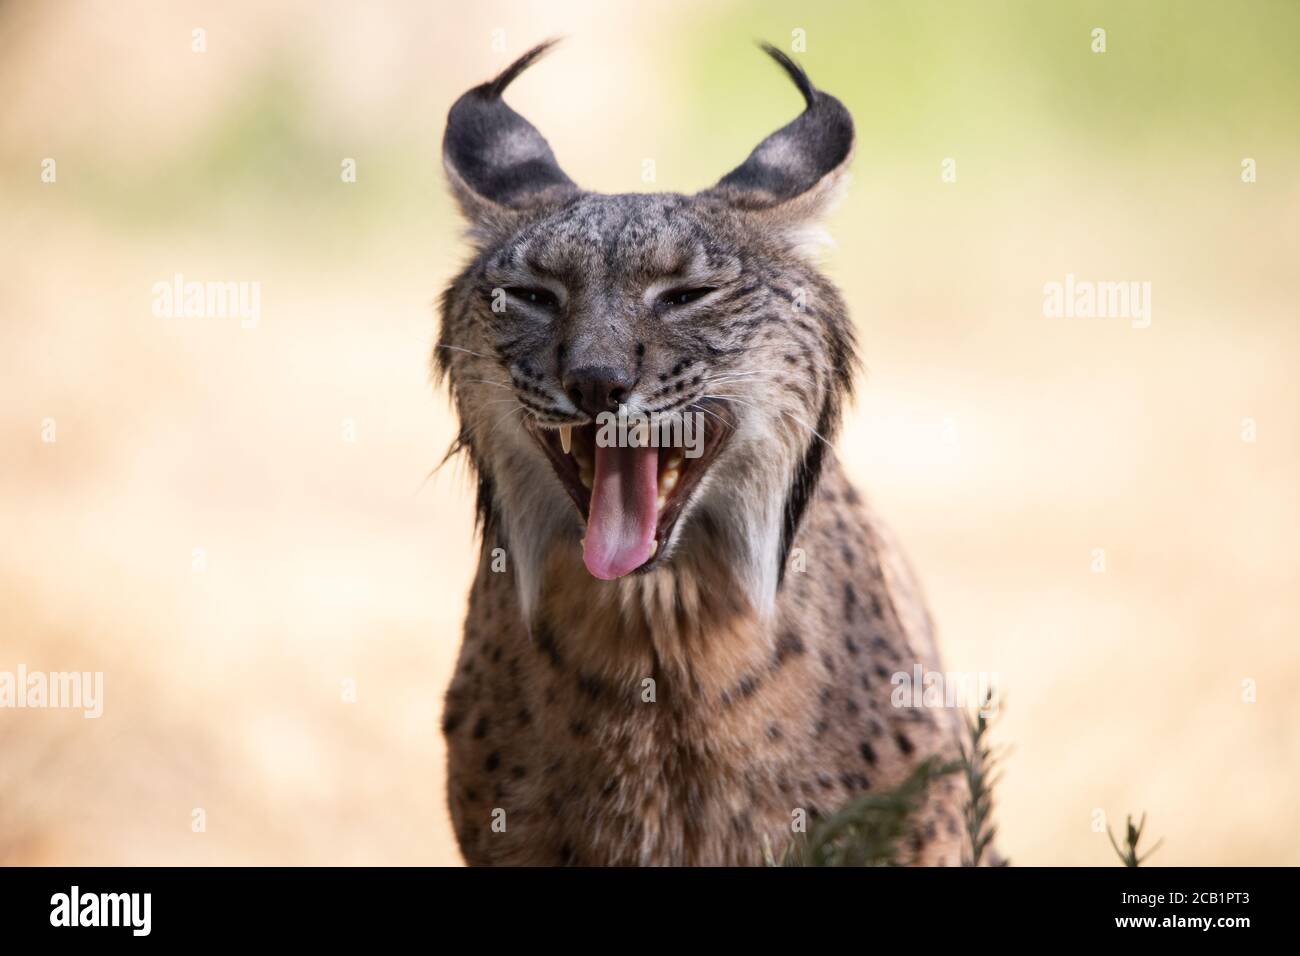 Cute face portrait of a iberian lynx yawning in the wild Stock Photo